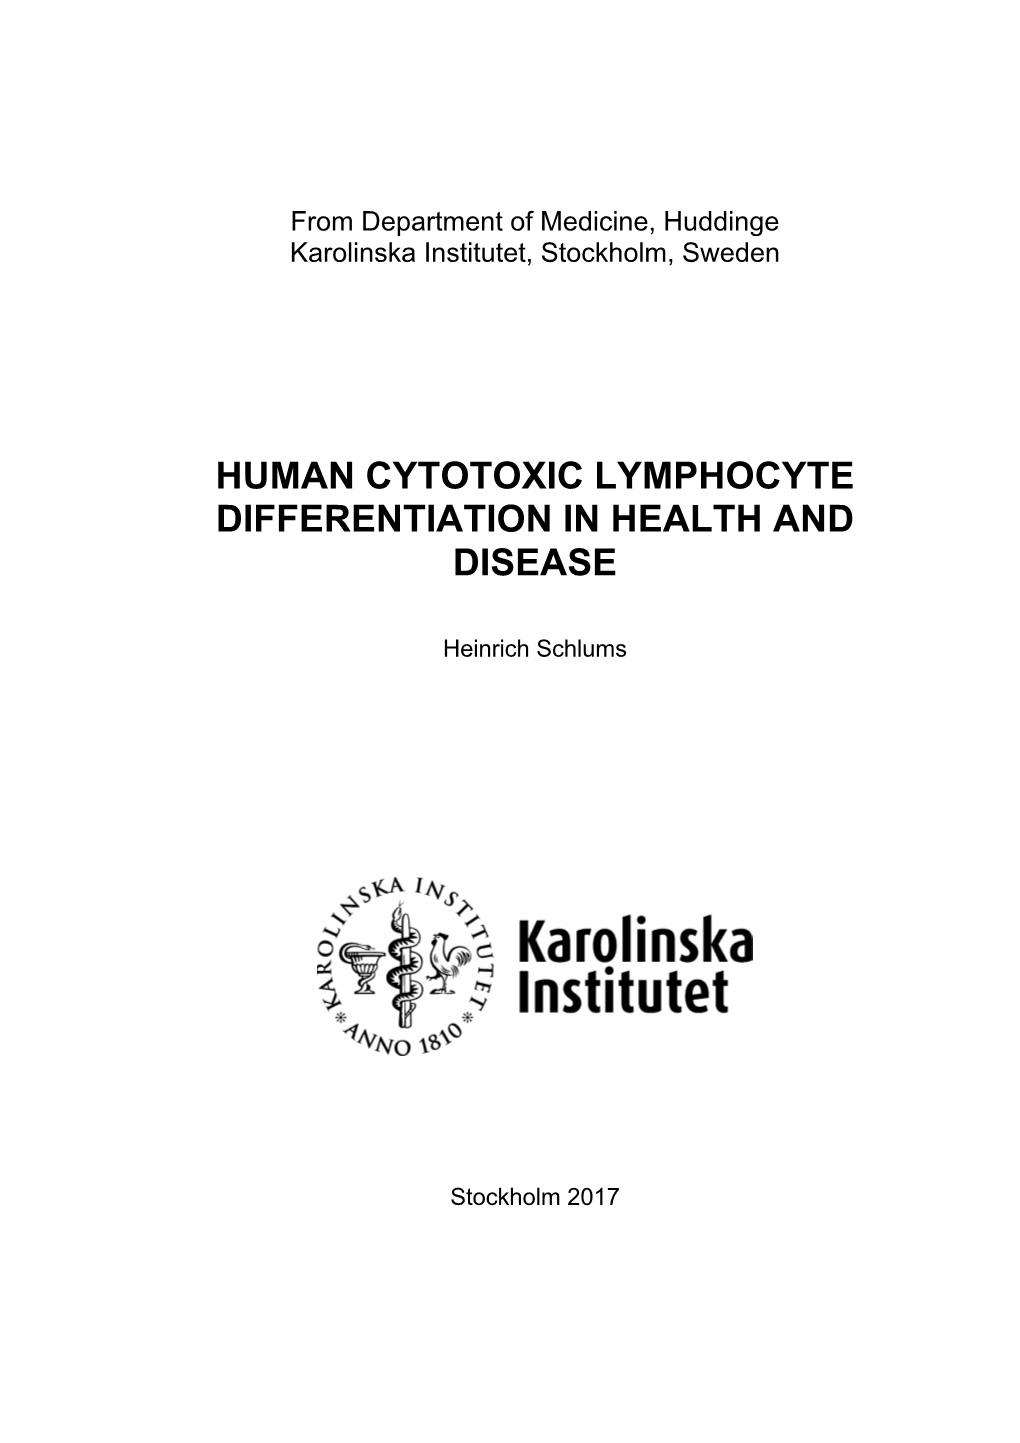 Human Cytotoxic Lymphocyte Differentiation in Health and Disease